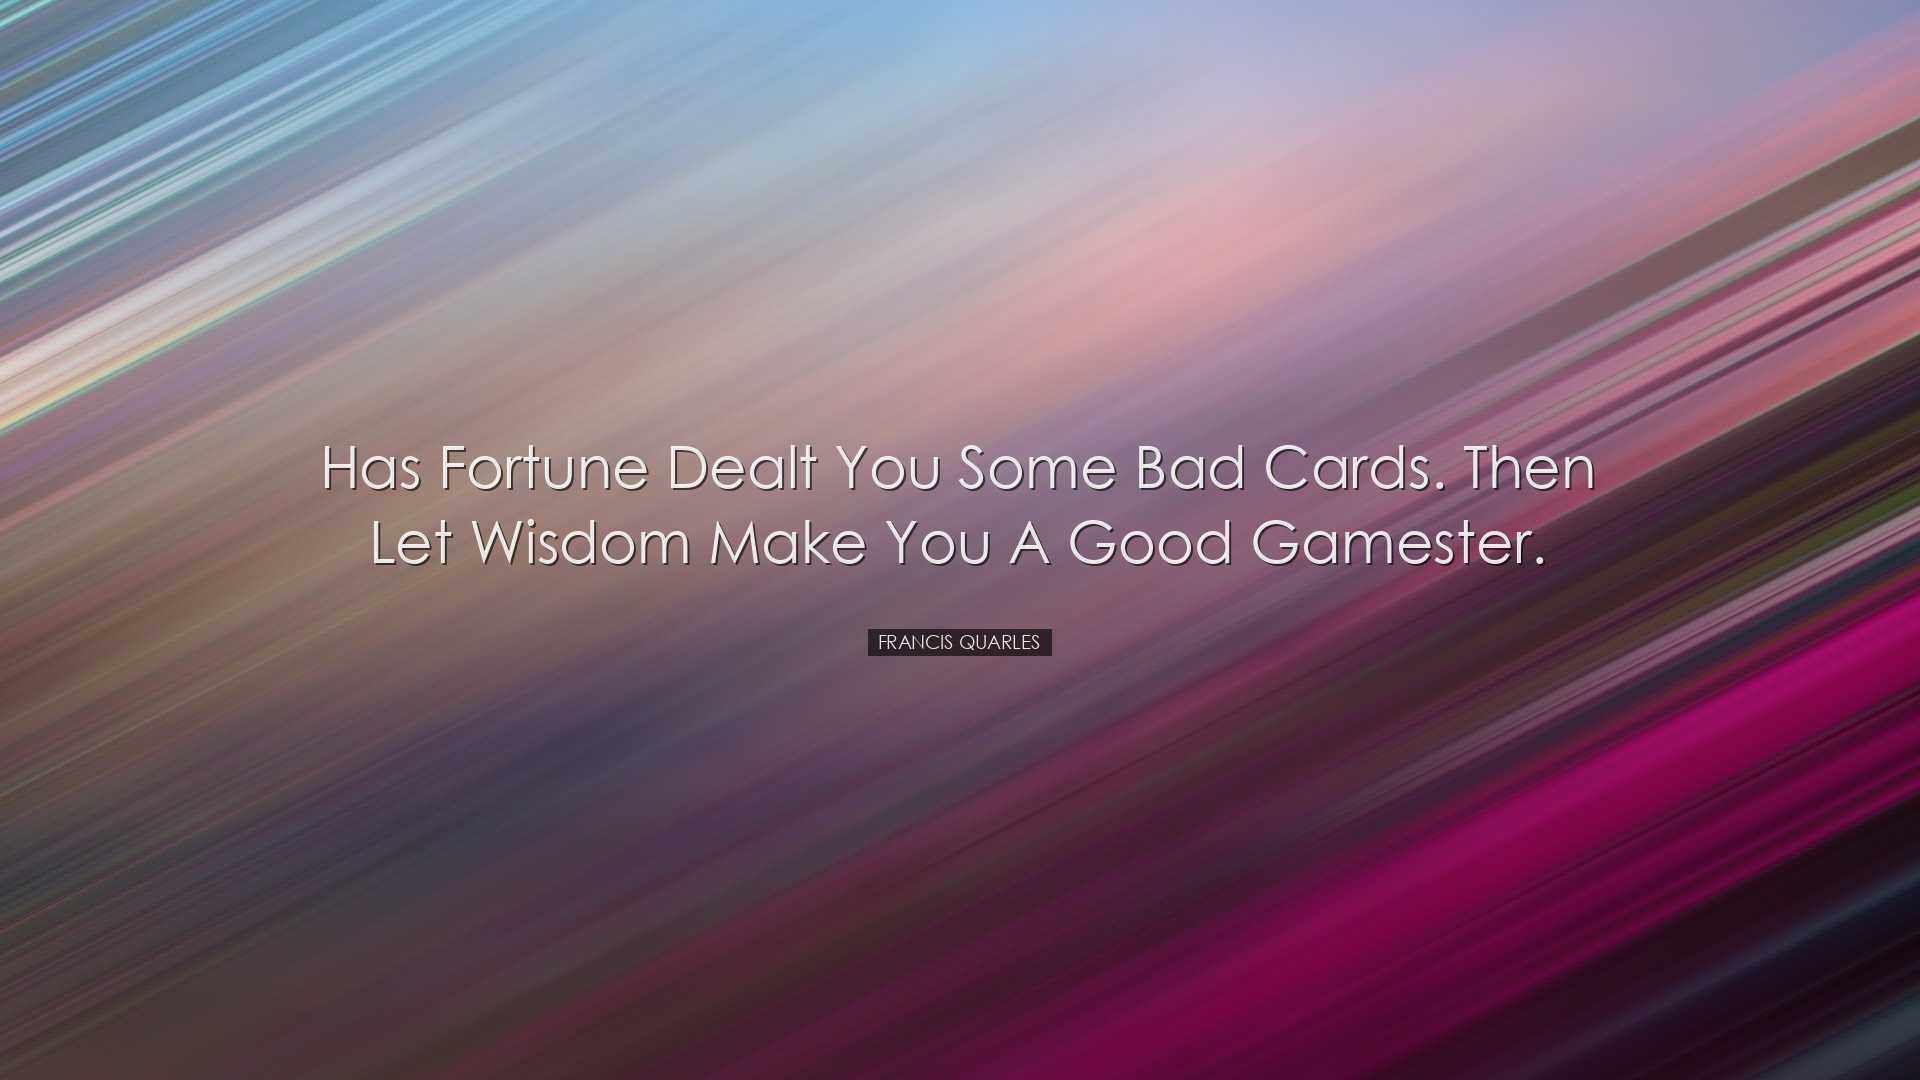 Has fortune dealt you some bad cards. Then let wisdom make you a g